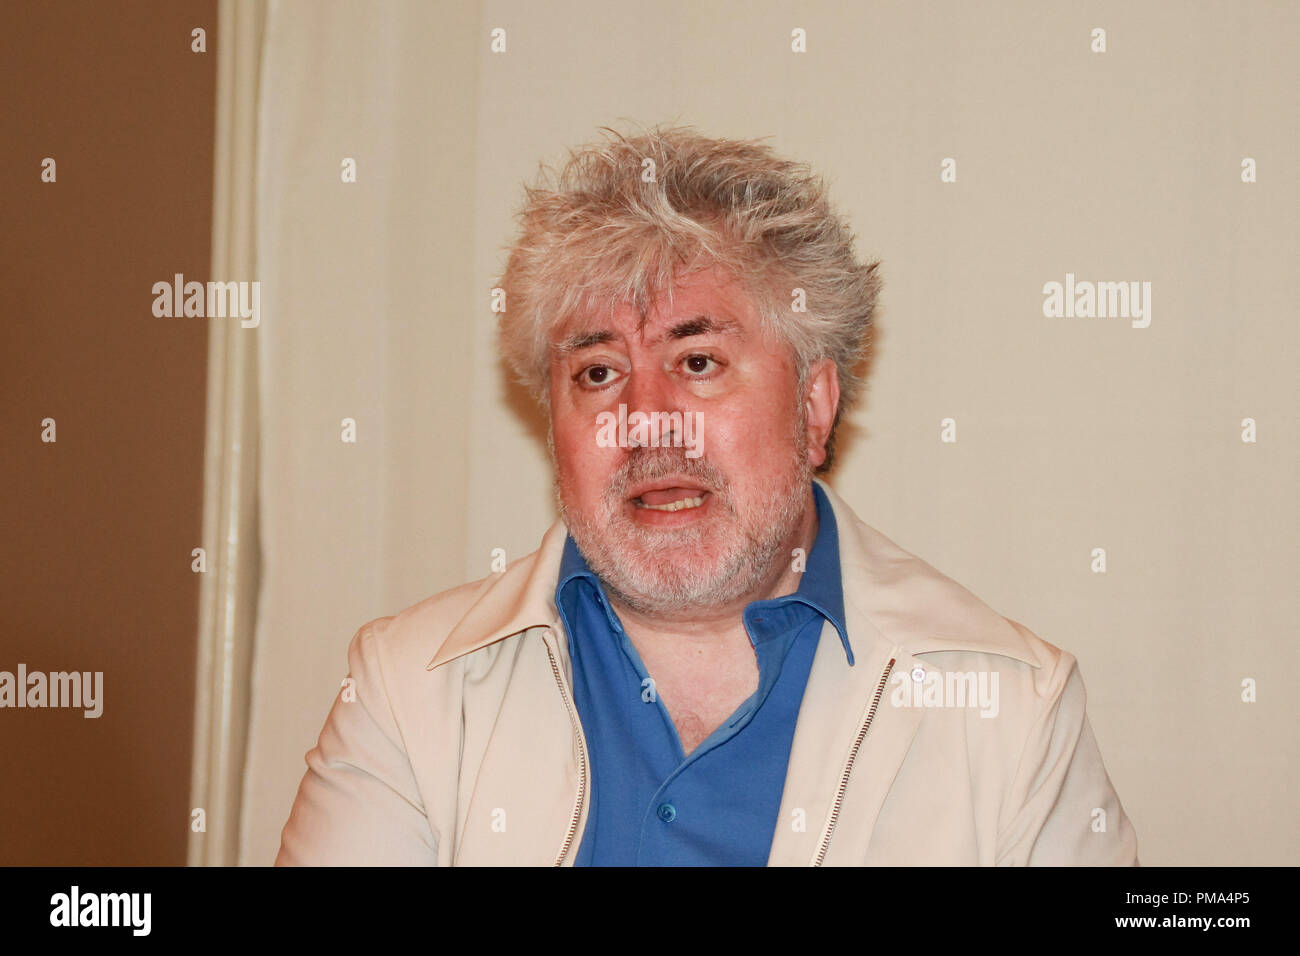 Pedro Almodovar 'I'm So Excited' Portrait Session, June 14, 2013. Reproduction by American tabloids is absolutely forbidden. File Reference # 32005 006JRC  For Editorial Use Only -  All Rights Reserved Stock Photo